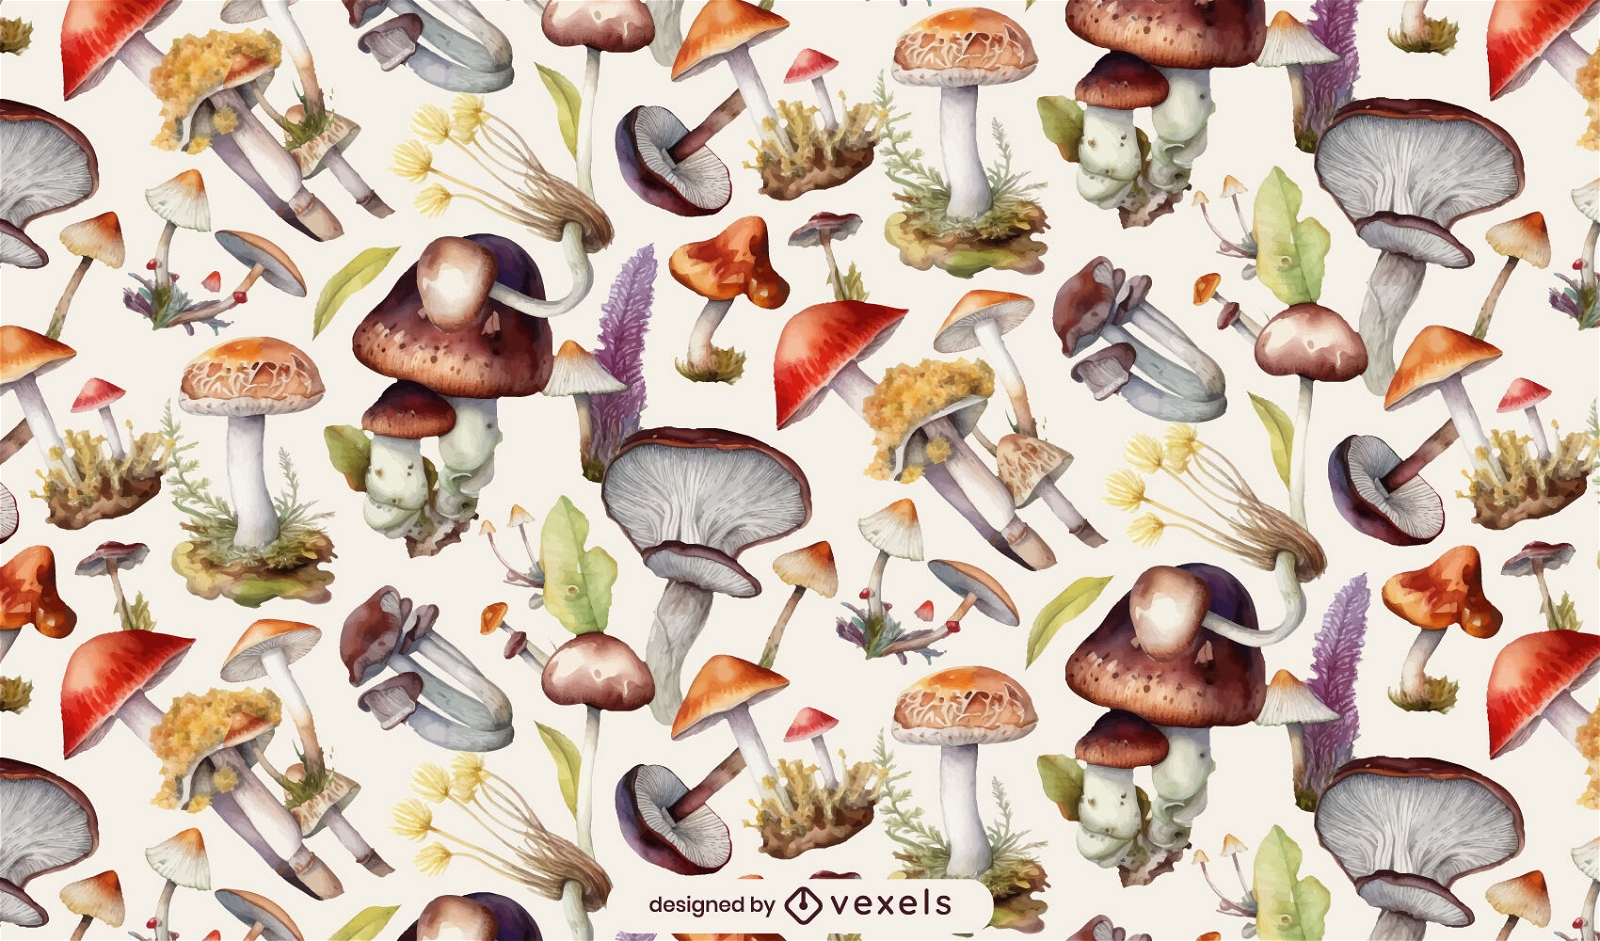 Realistic mushrooms and plants pattern design